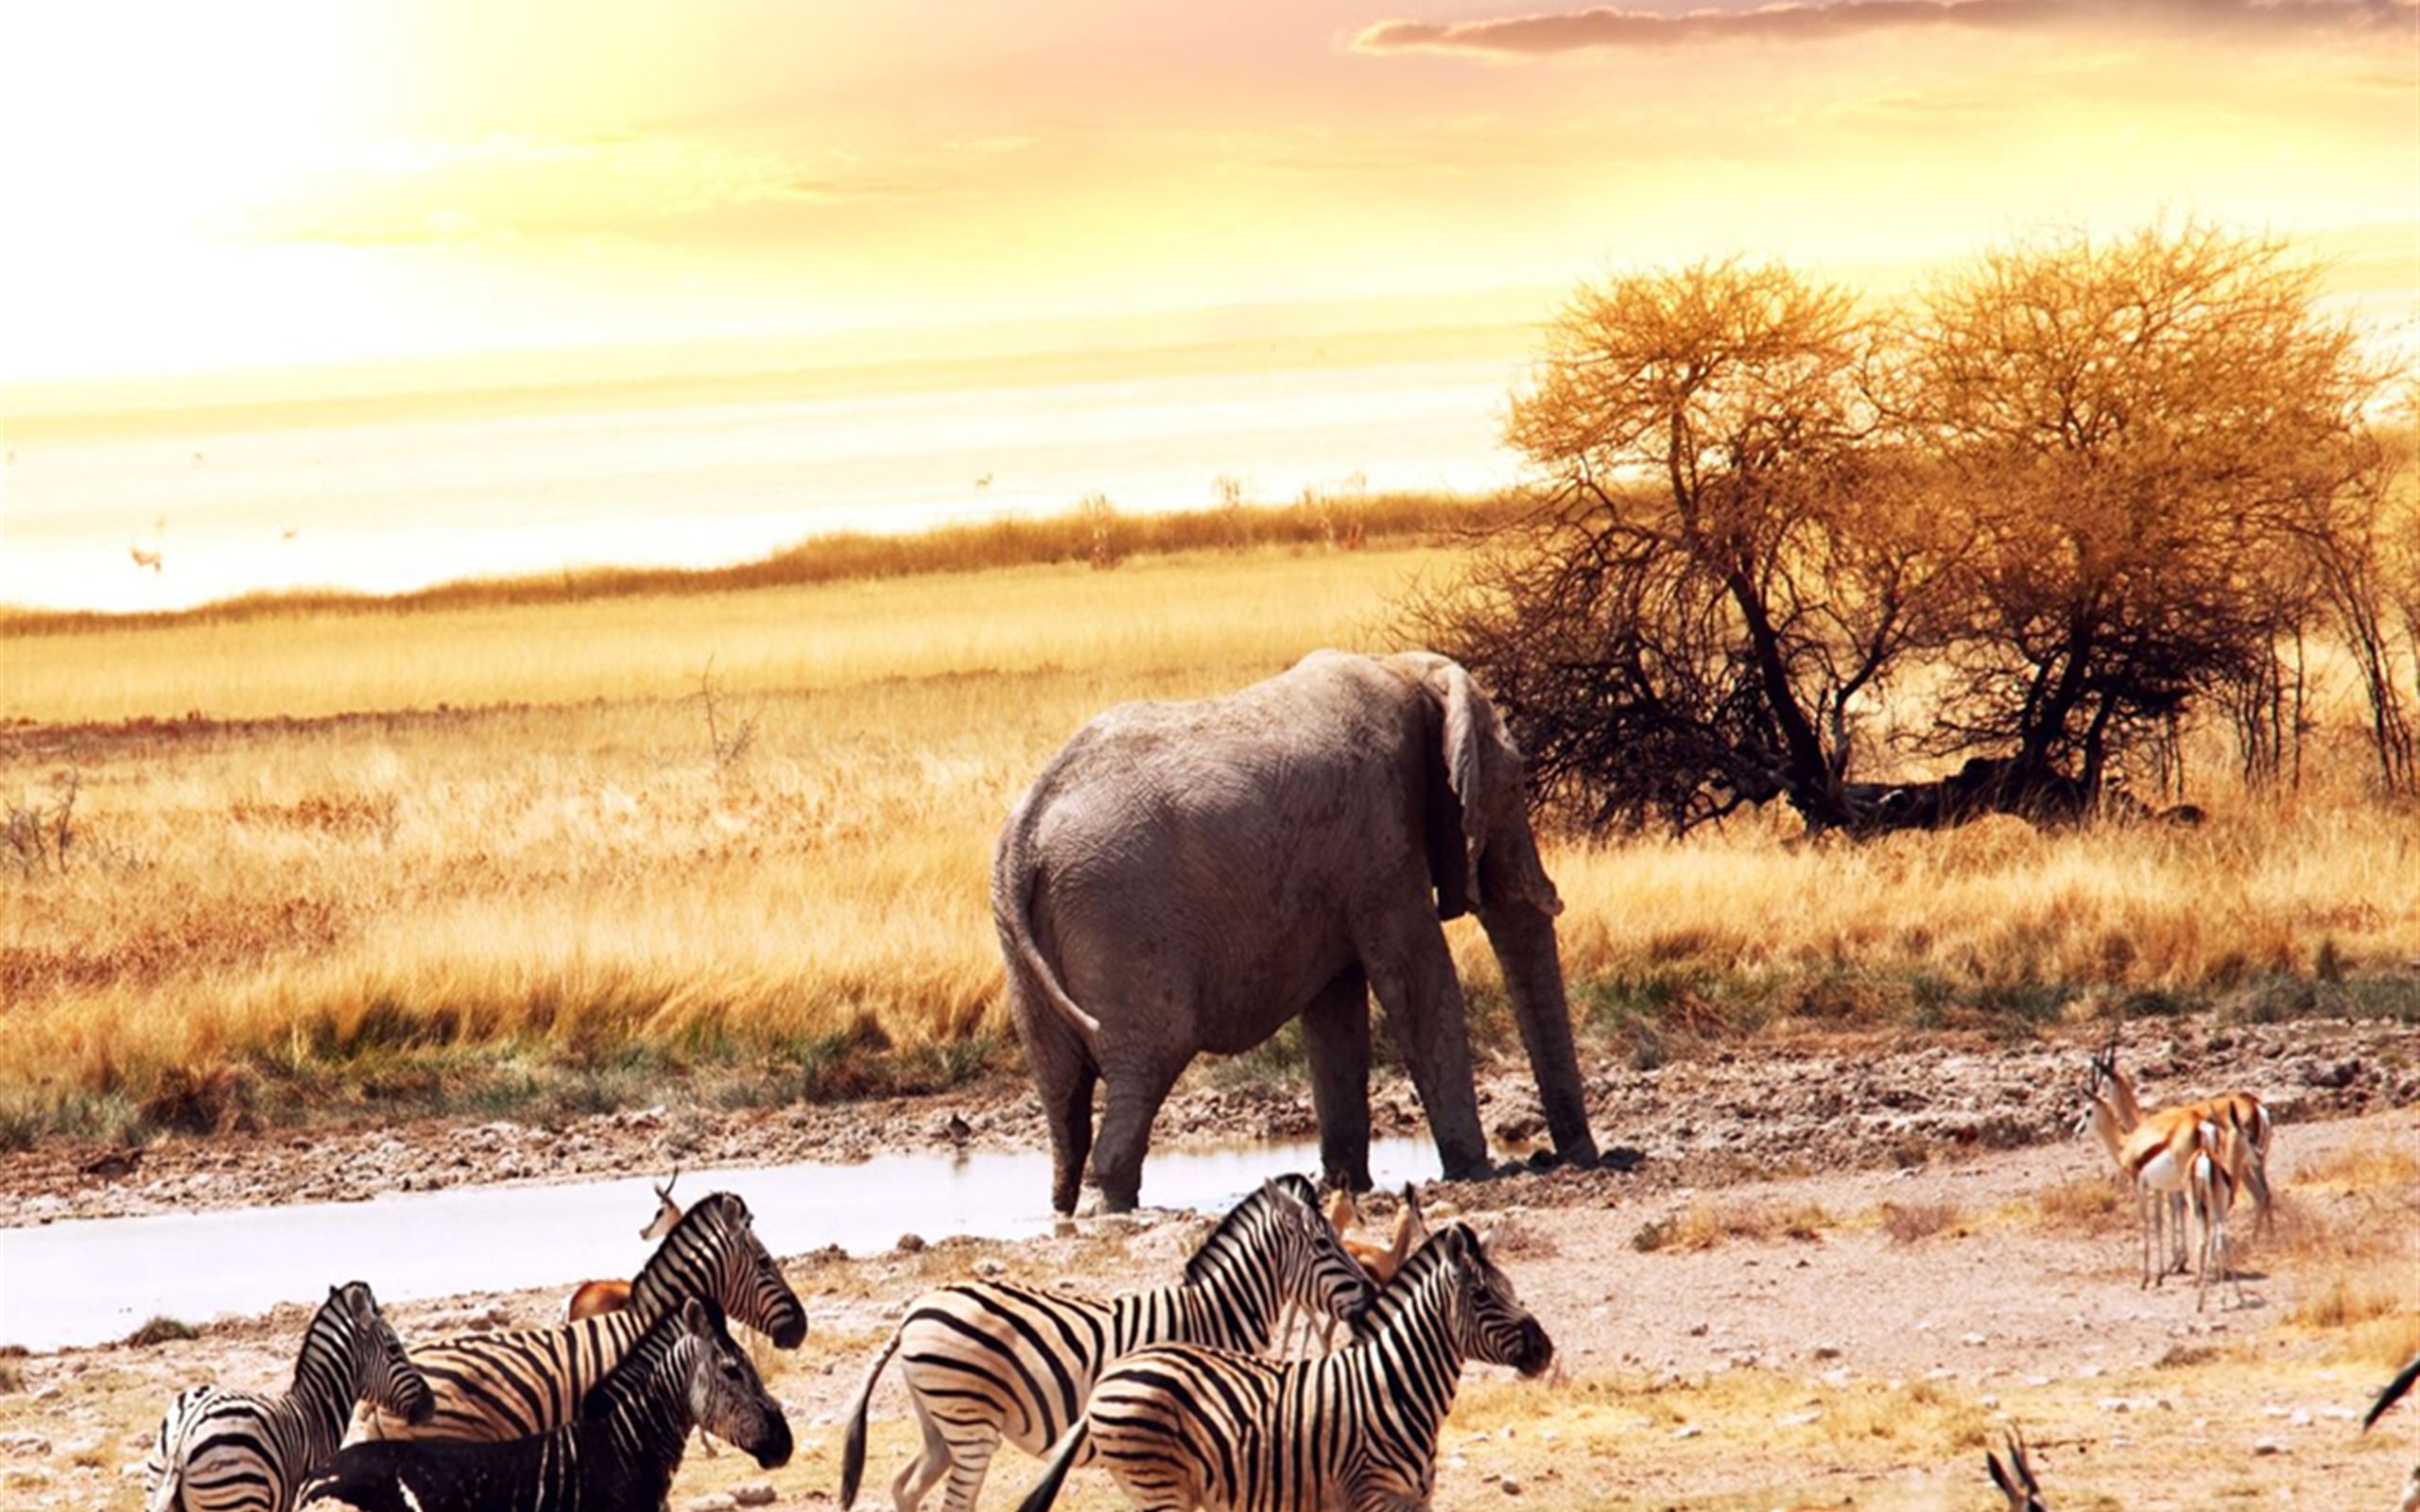 Wild Animals In Africa iPad Wallpapers Free Download